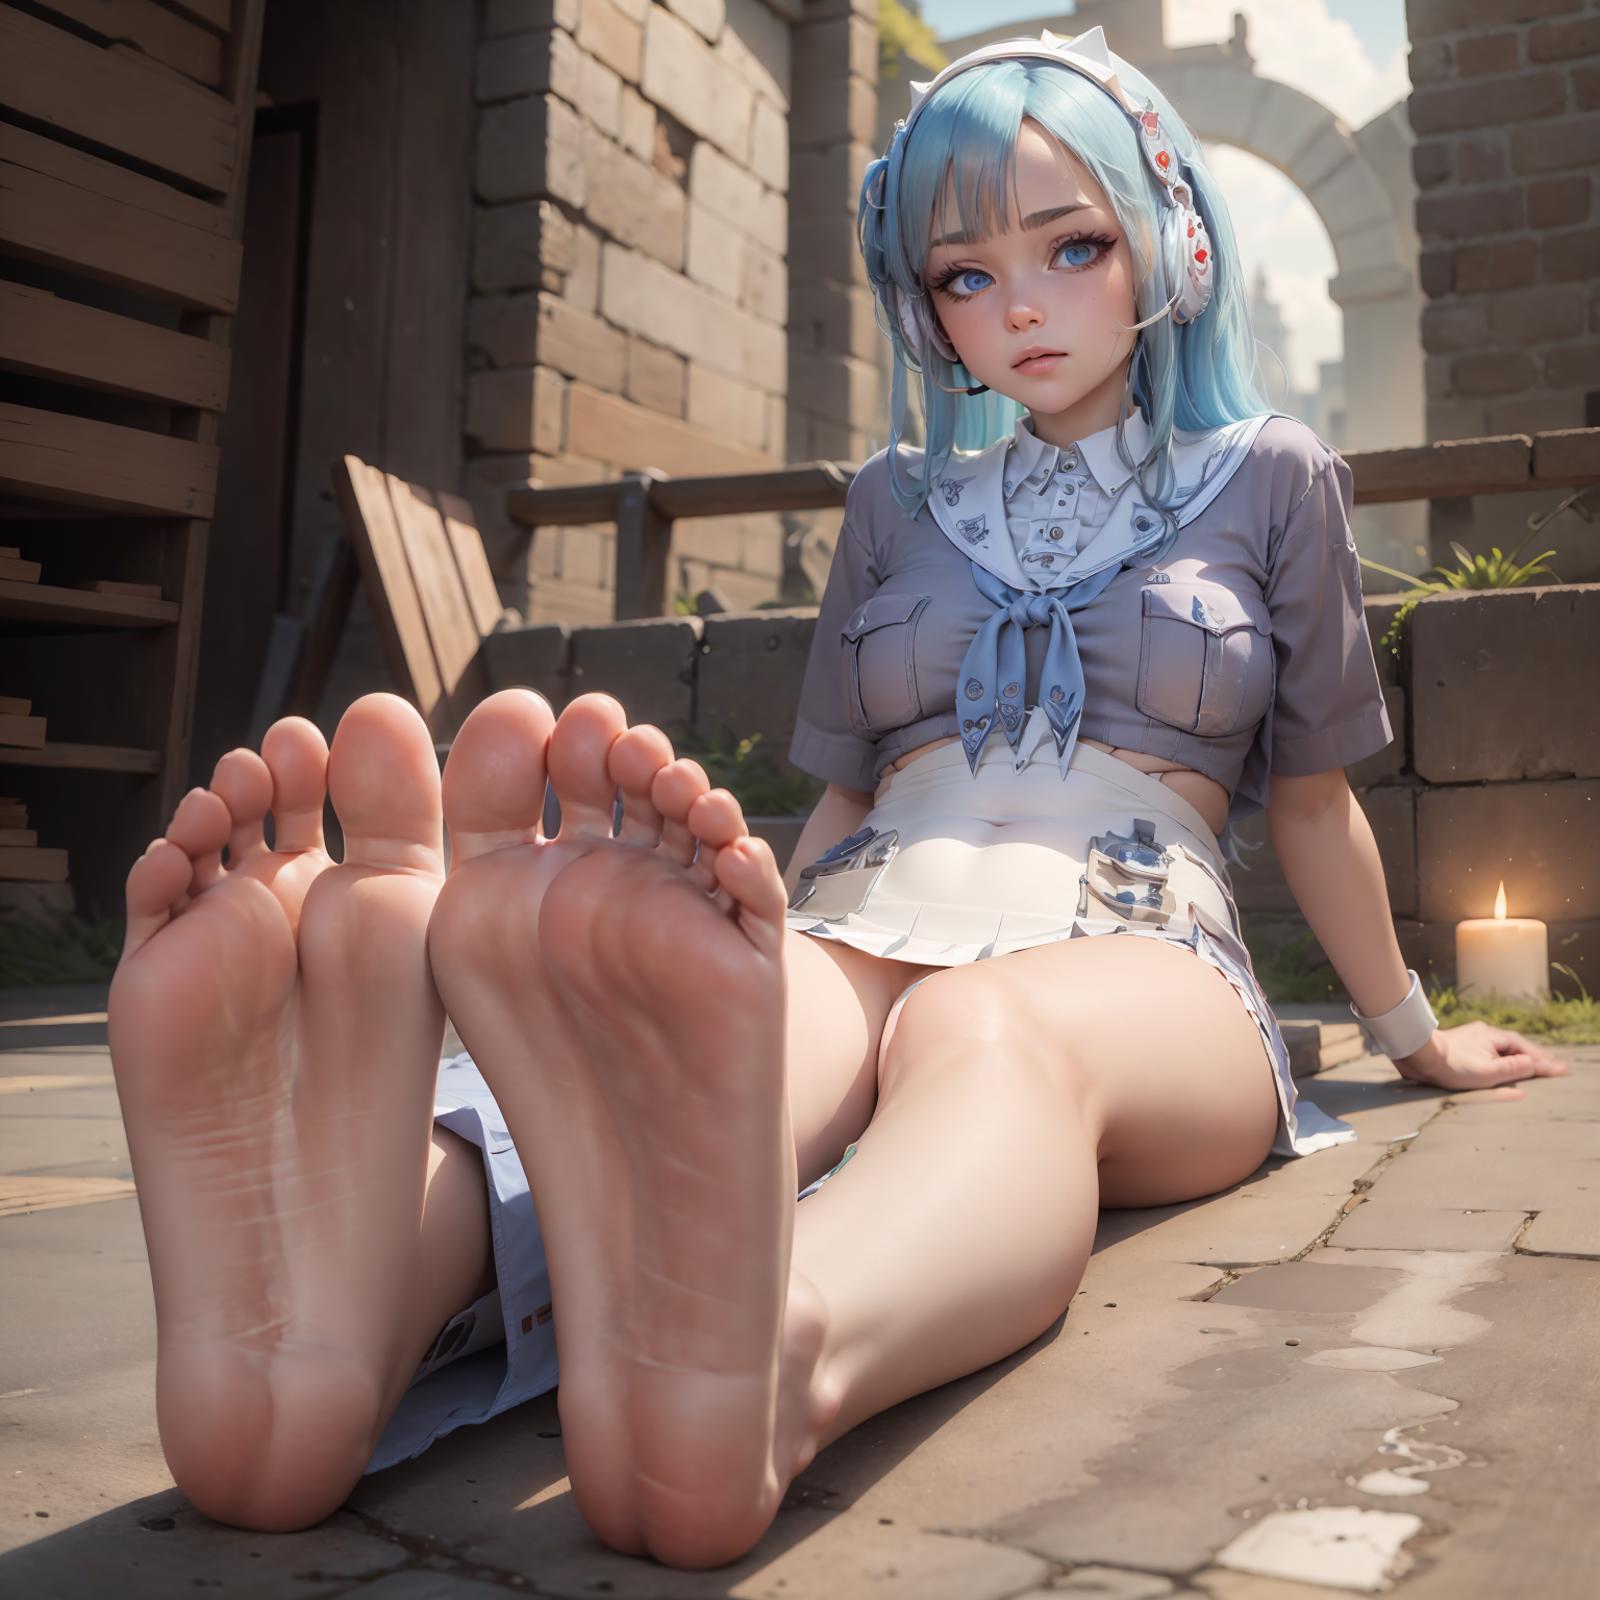 Feet Pose (anime) image by EnergeticRooster